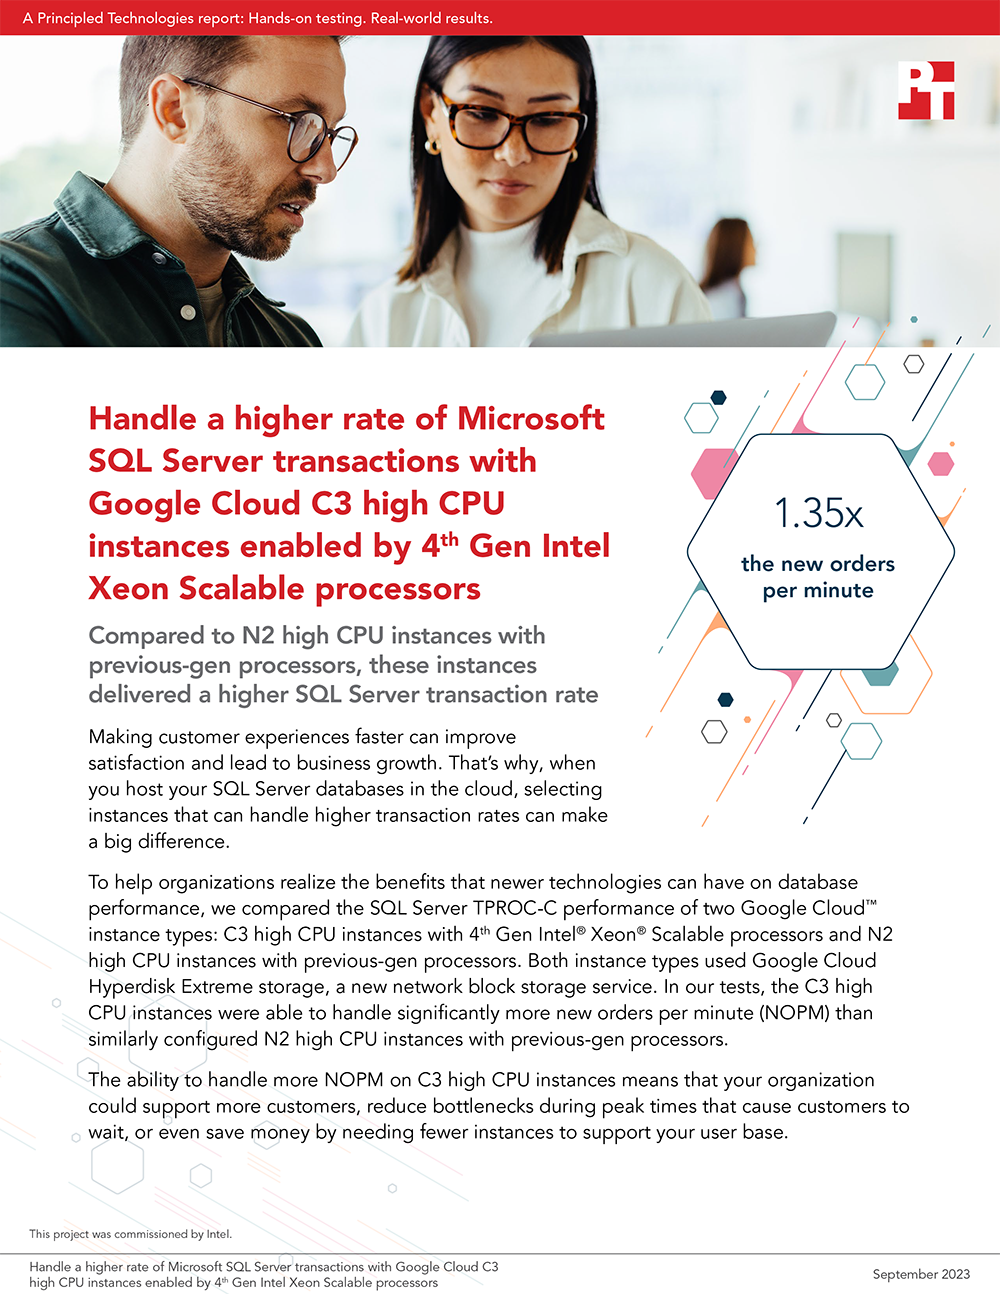  Handle a higher rate of Microsoft SQL Server transactions with Google Cloud C3 high CPU instances enabled by 4th Gen Intel Xeon Scalable processors